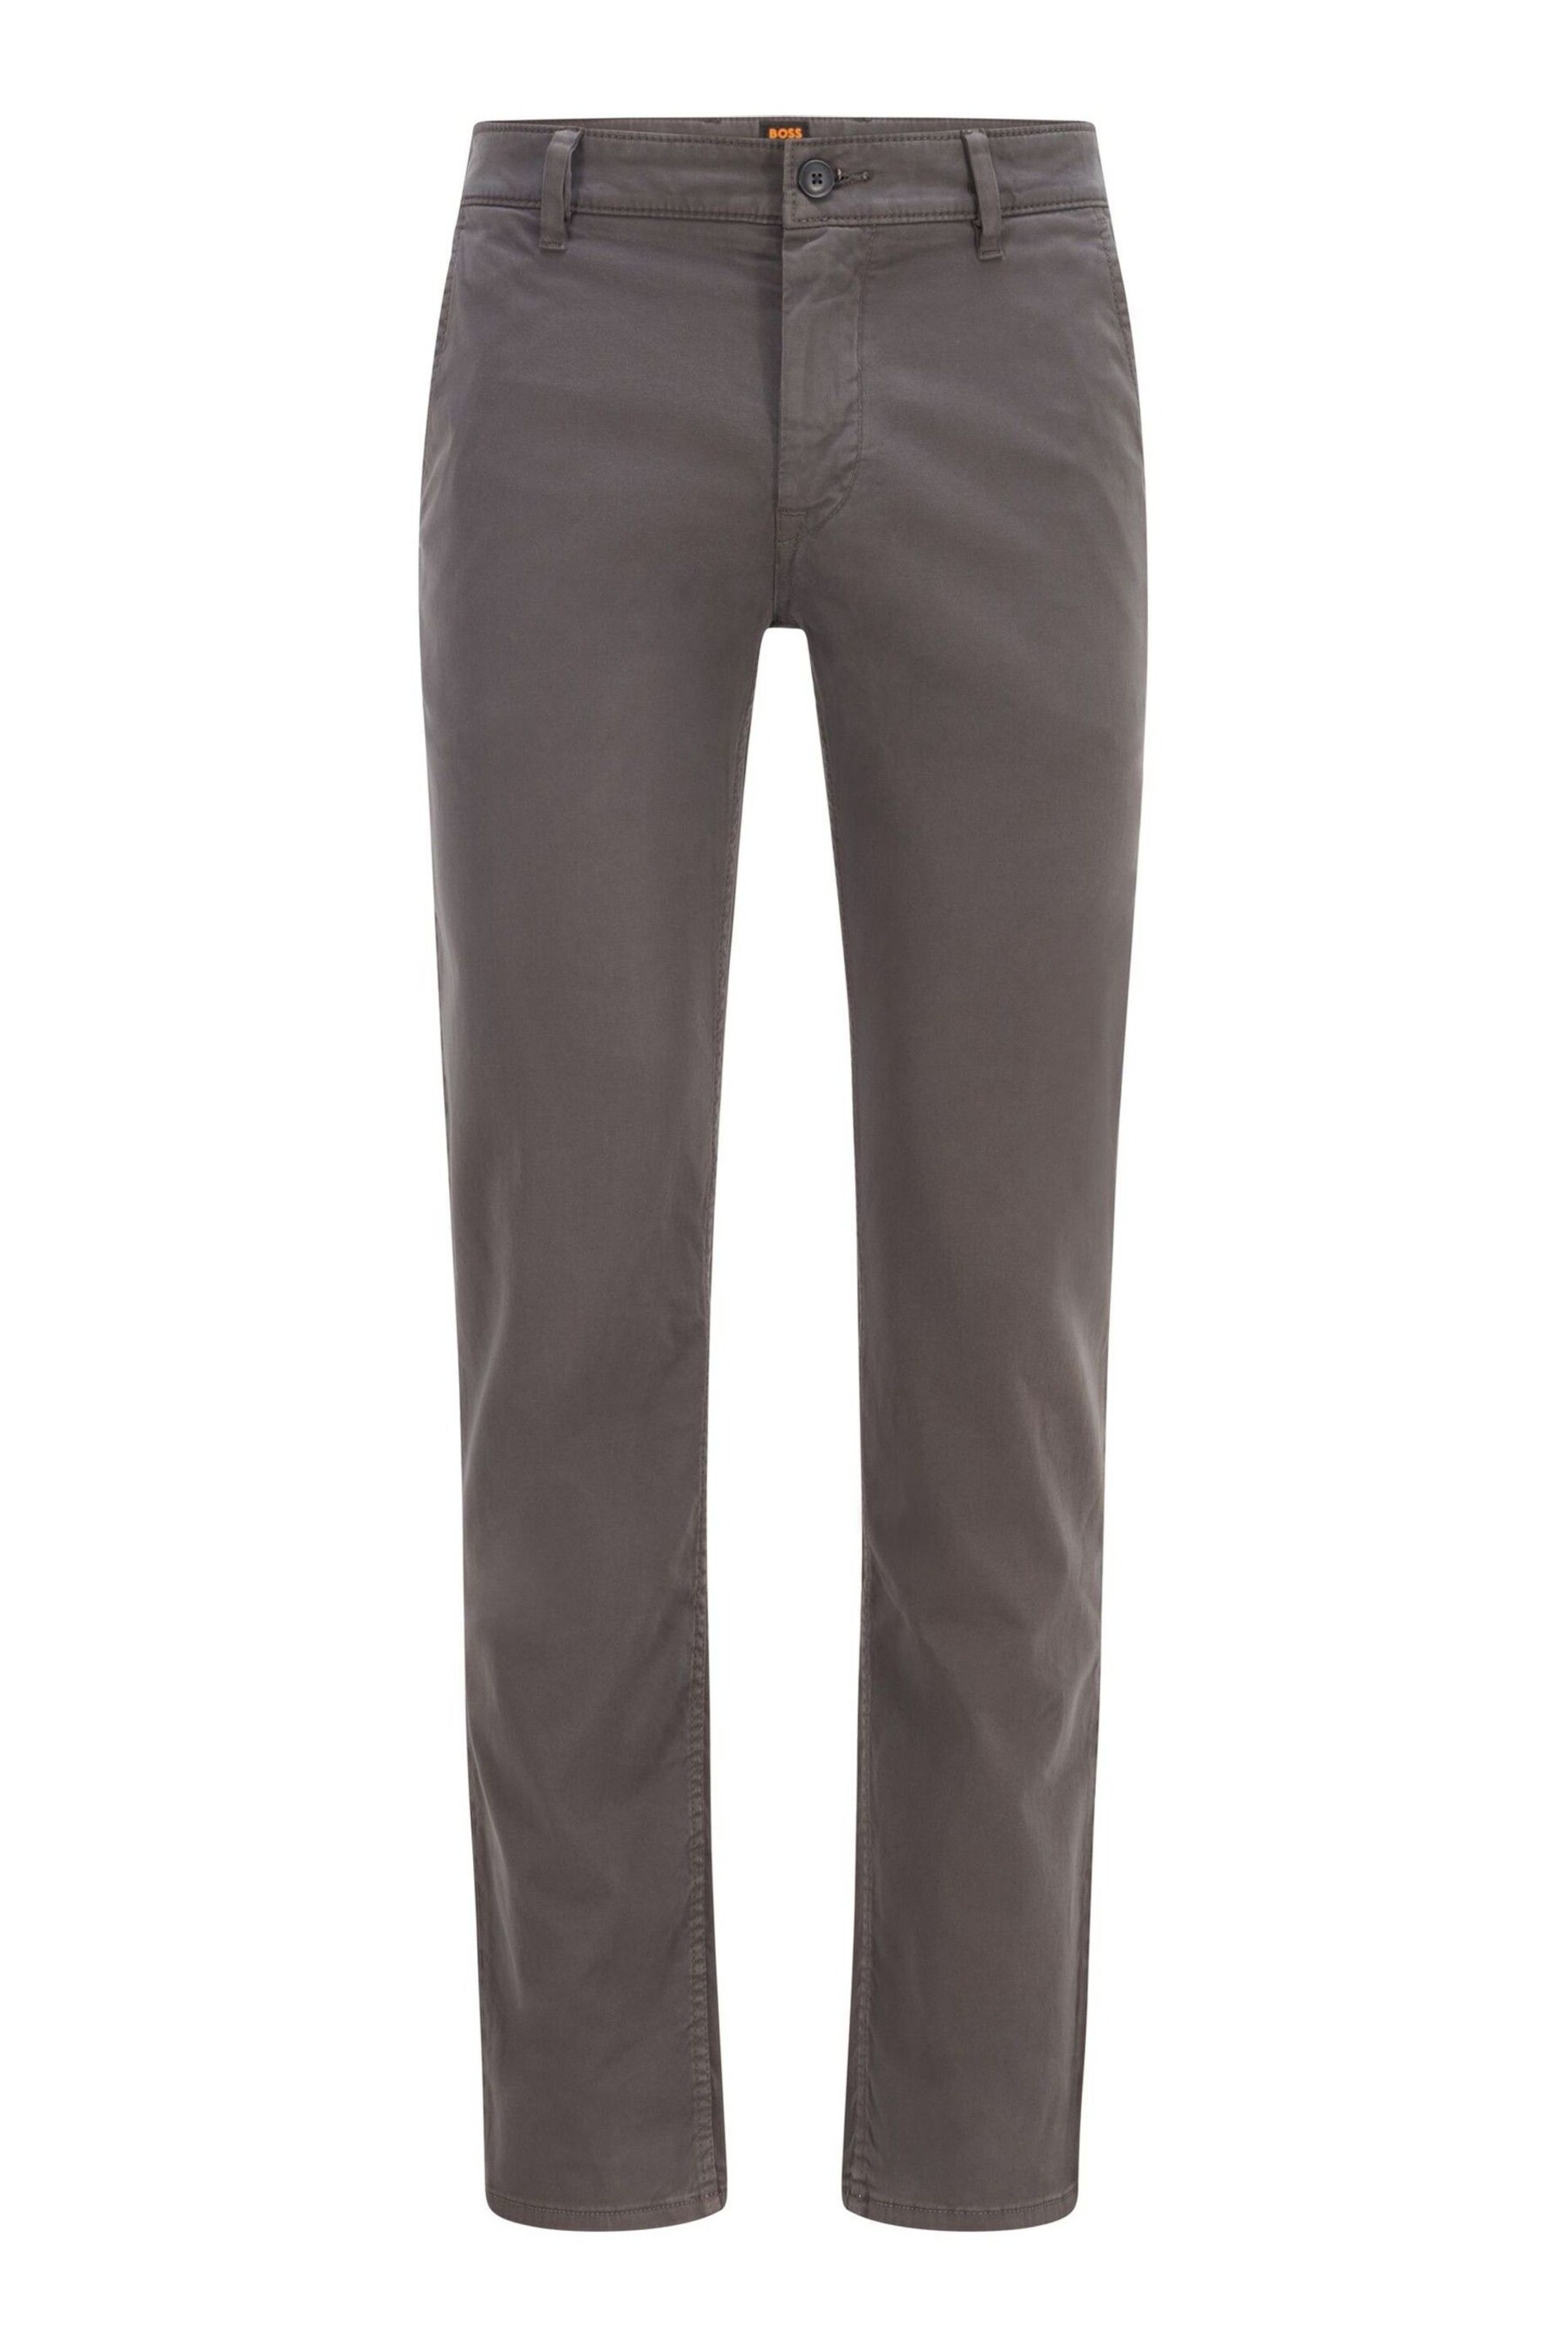 BOSS Charcoal Grey Schino Slim Fit Chinos - Image 5 of 5